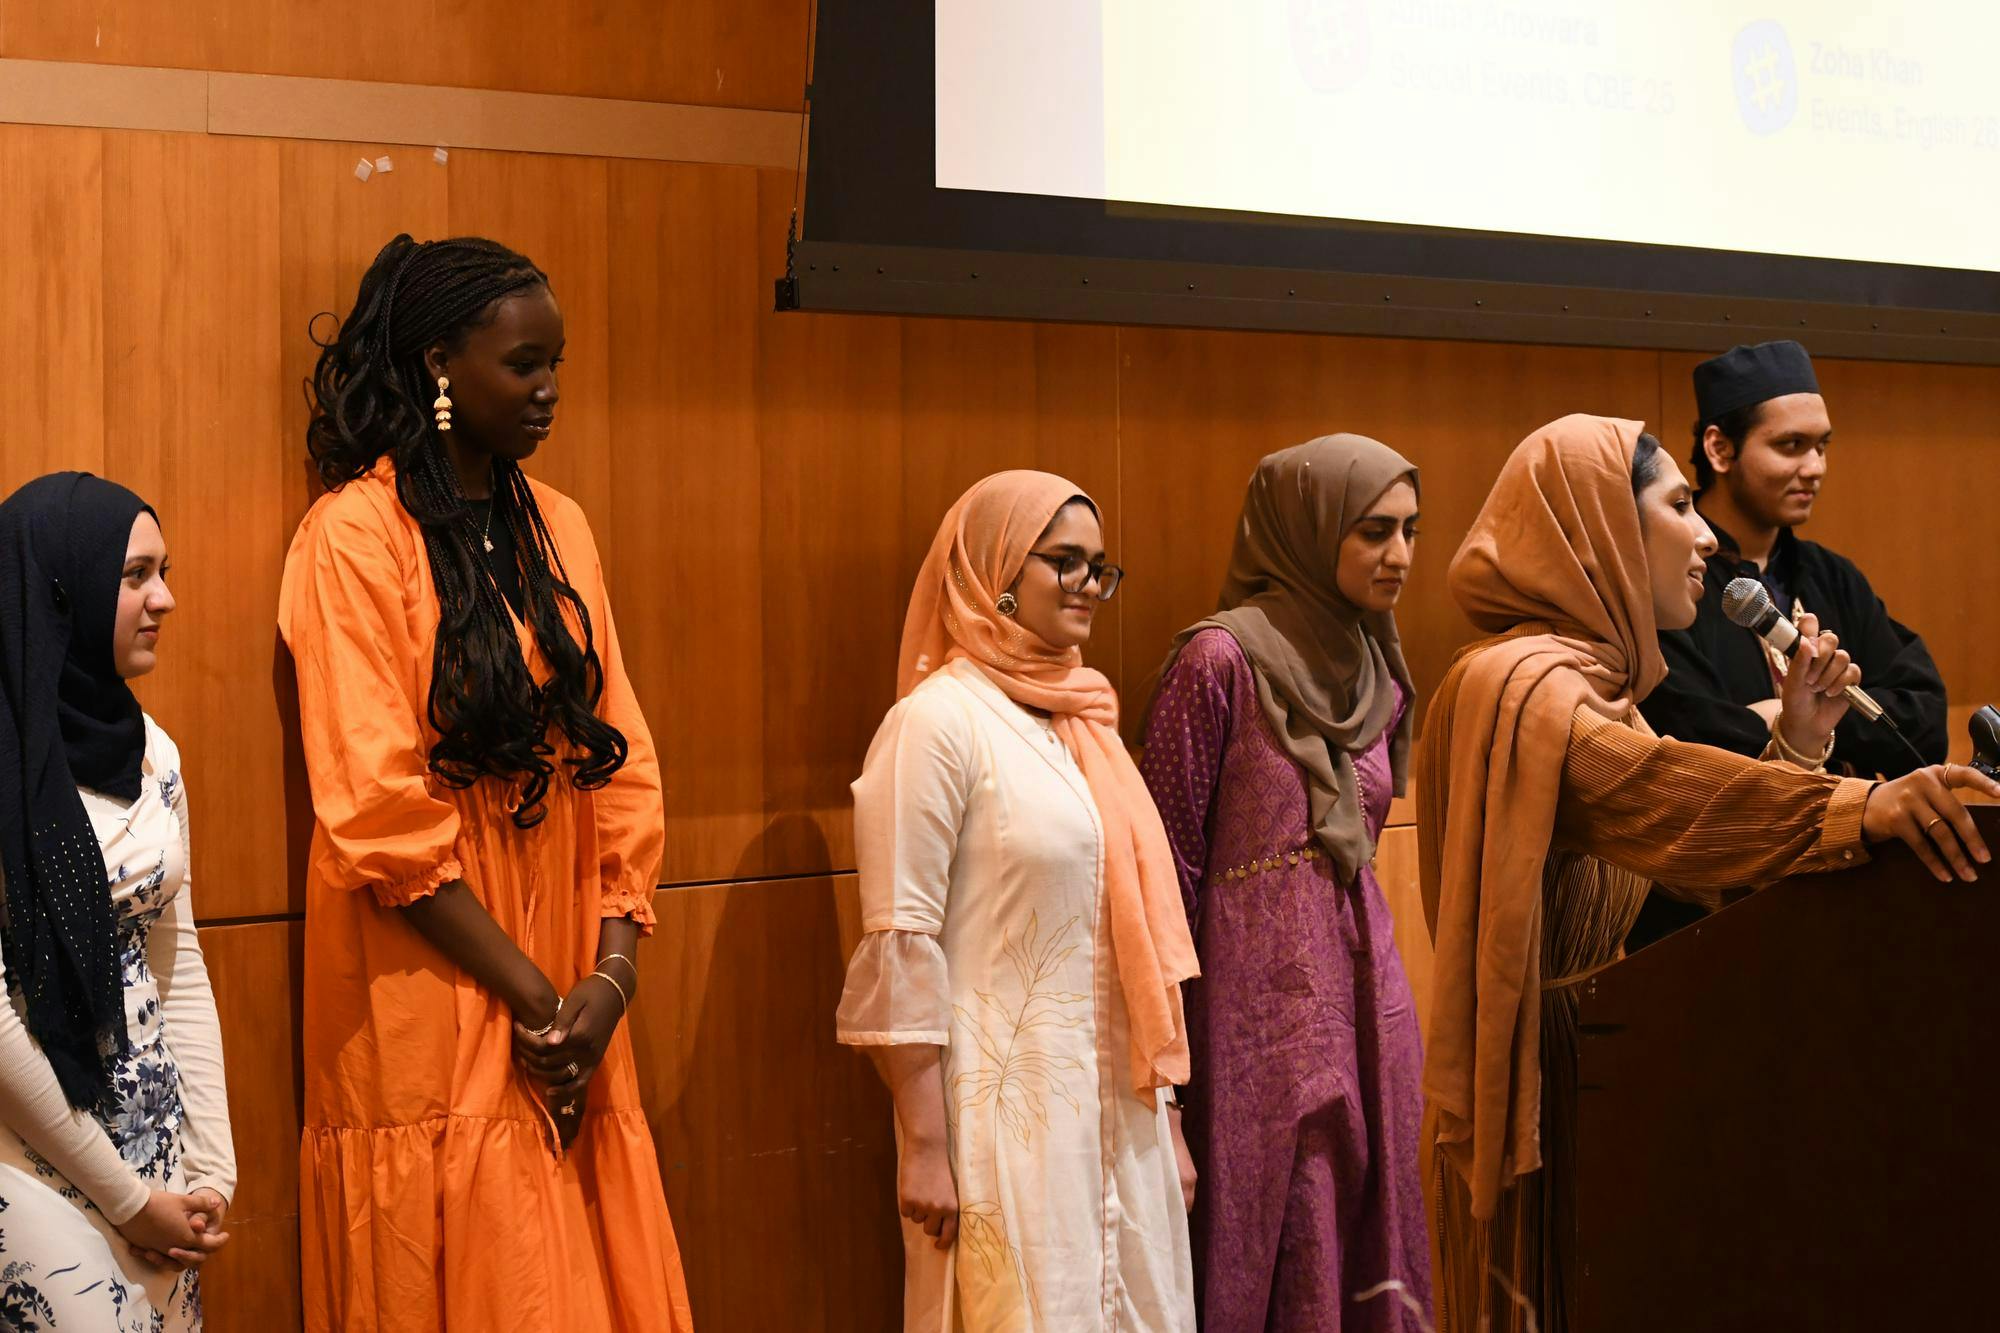 Several students in the Muslim Students Association are standing by the podium while one speaks to the audience.